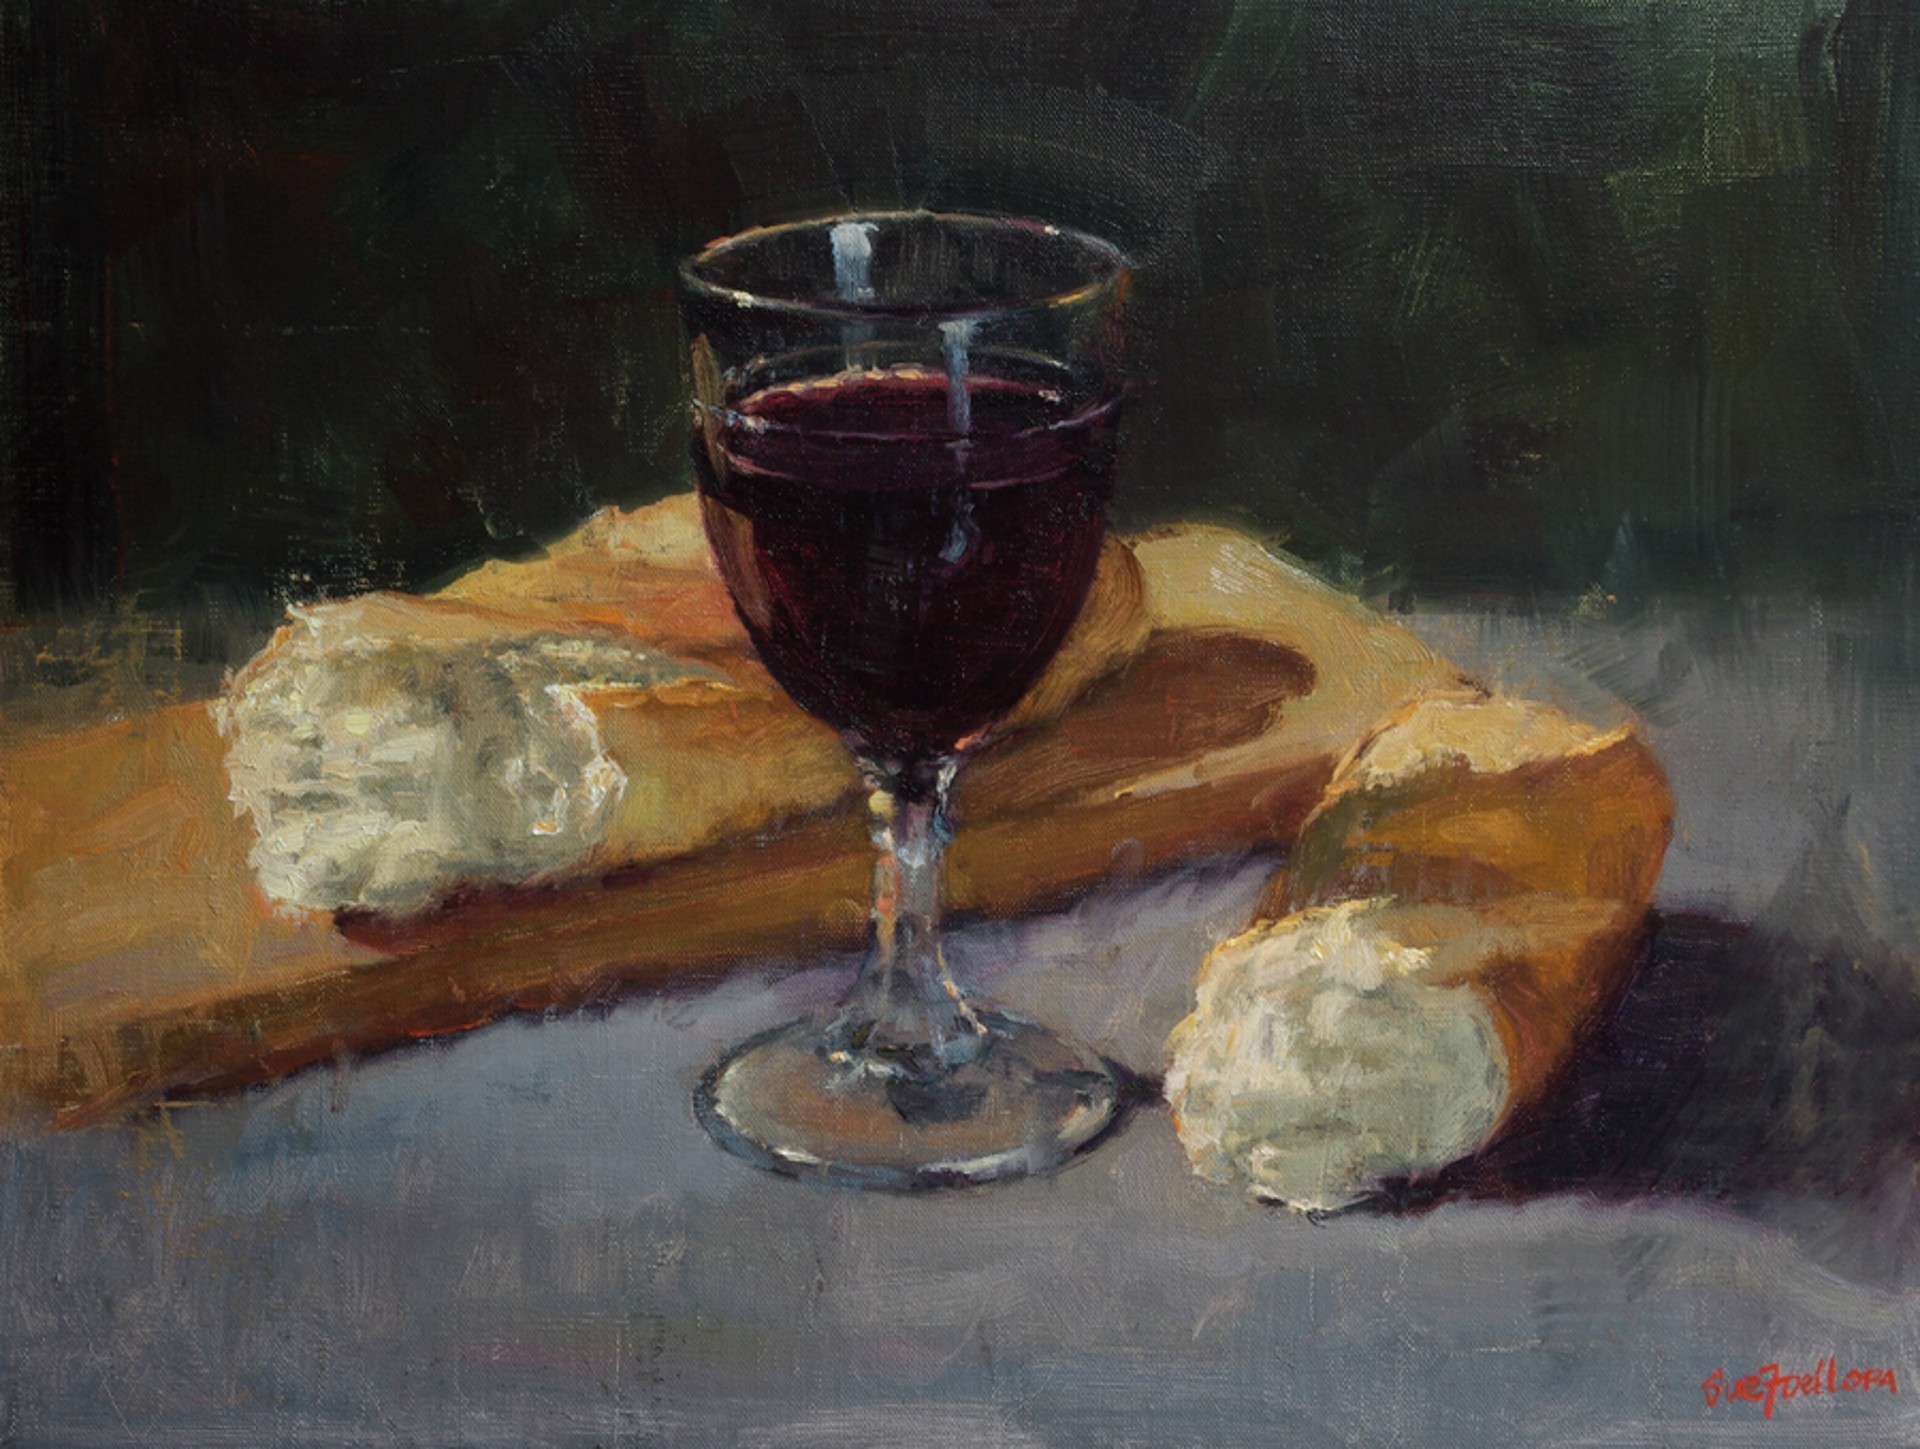 Bread and Wine by Sue Foell, opa